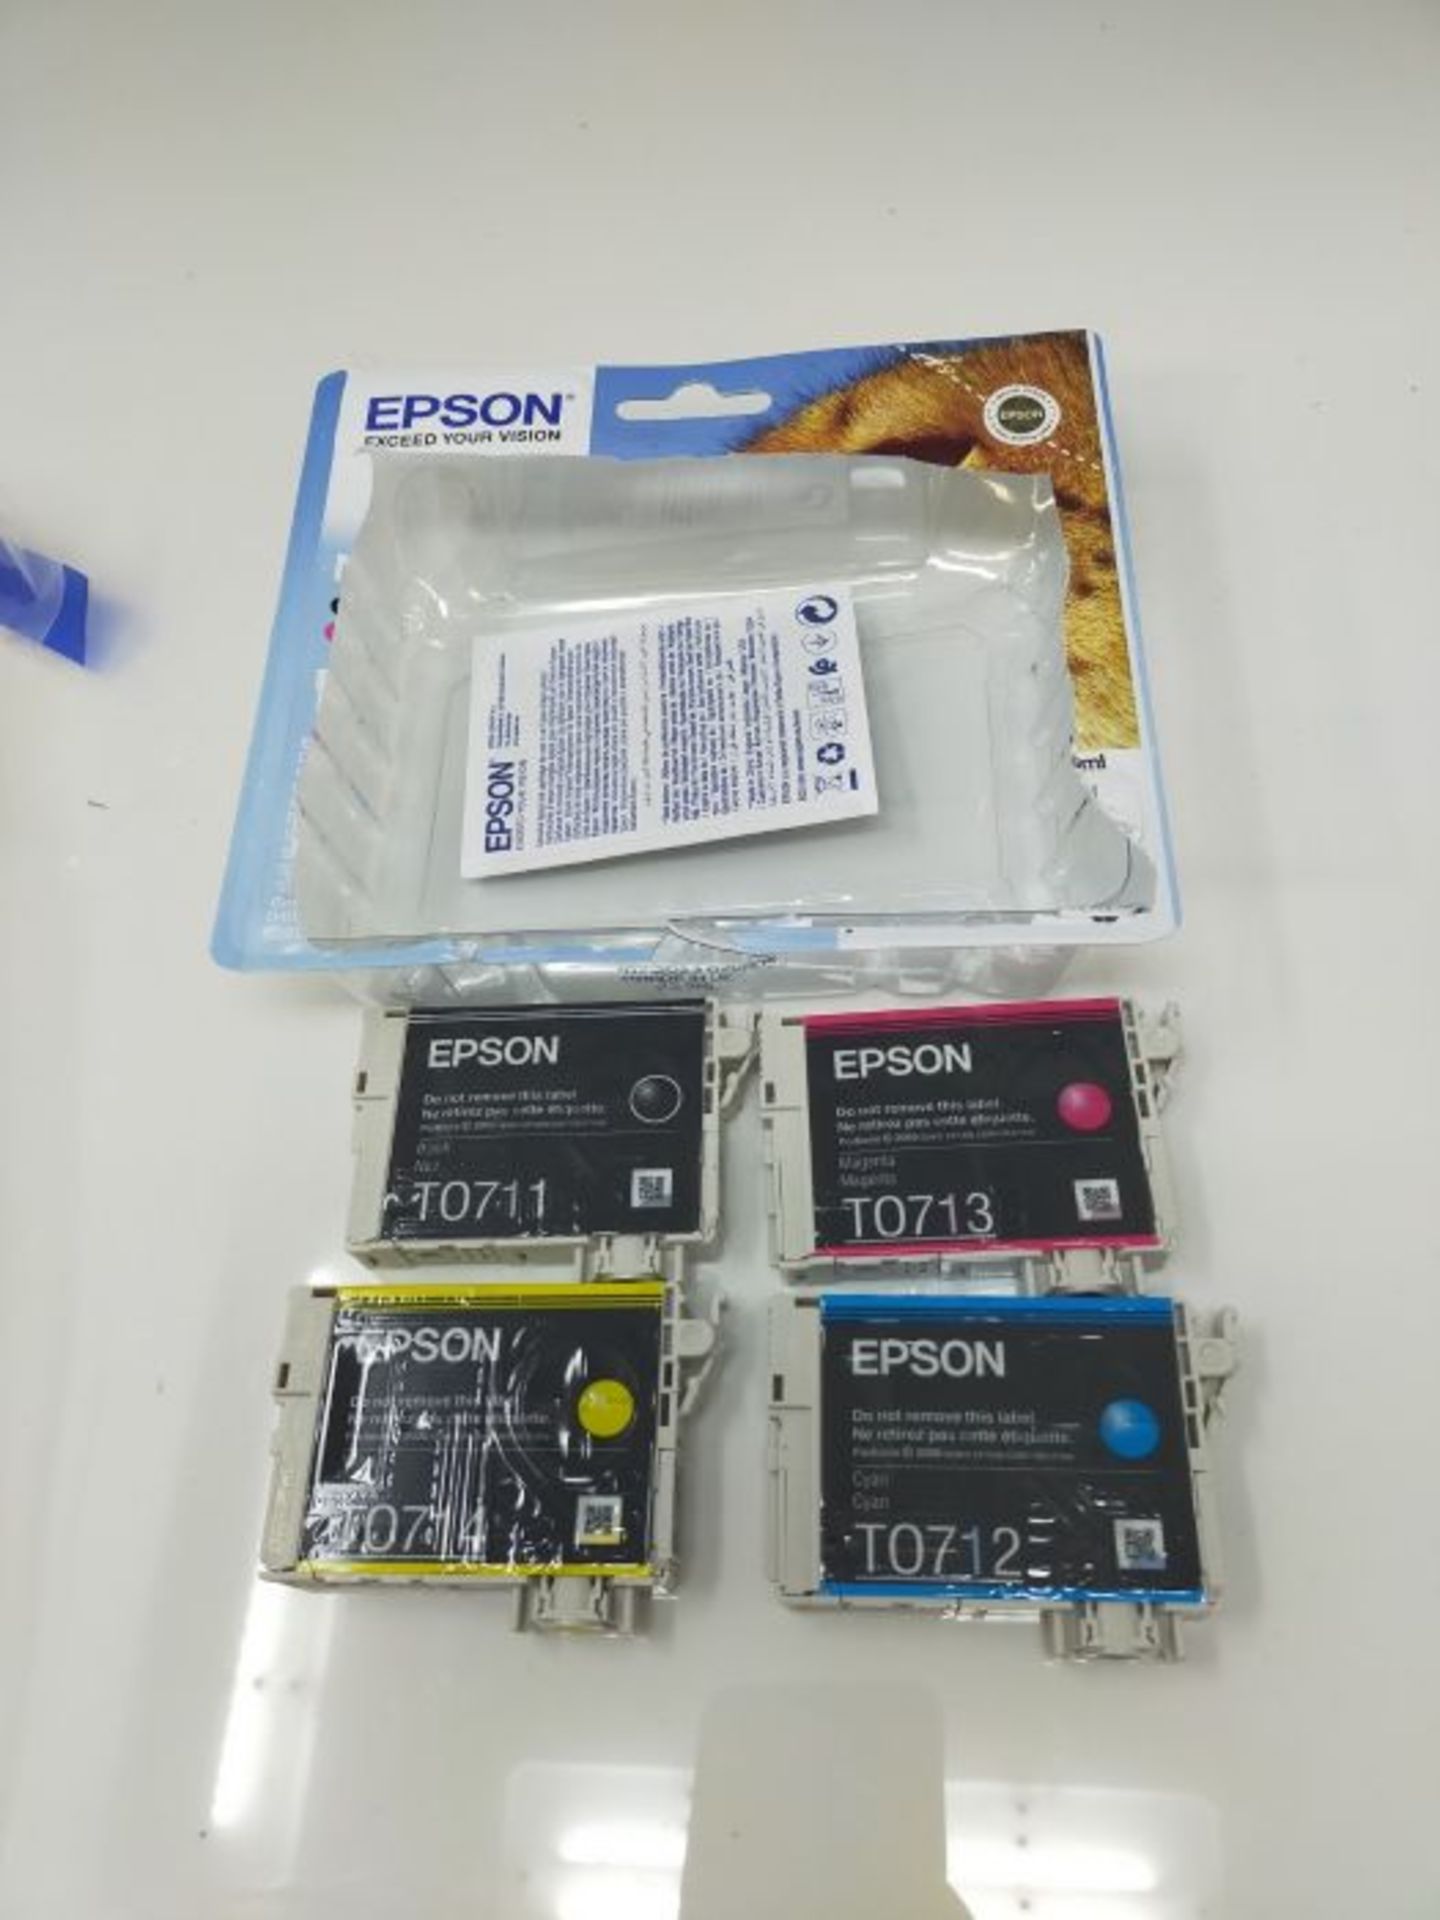 [CRACKED] EPSON Cheetah Ink Cartridge for Epson Stylus SX600FW Series - Assorted - Image 3 of 3